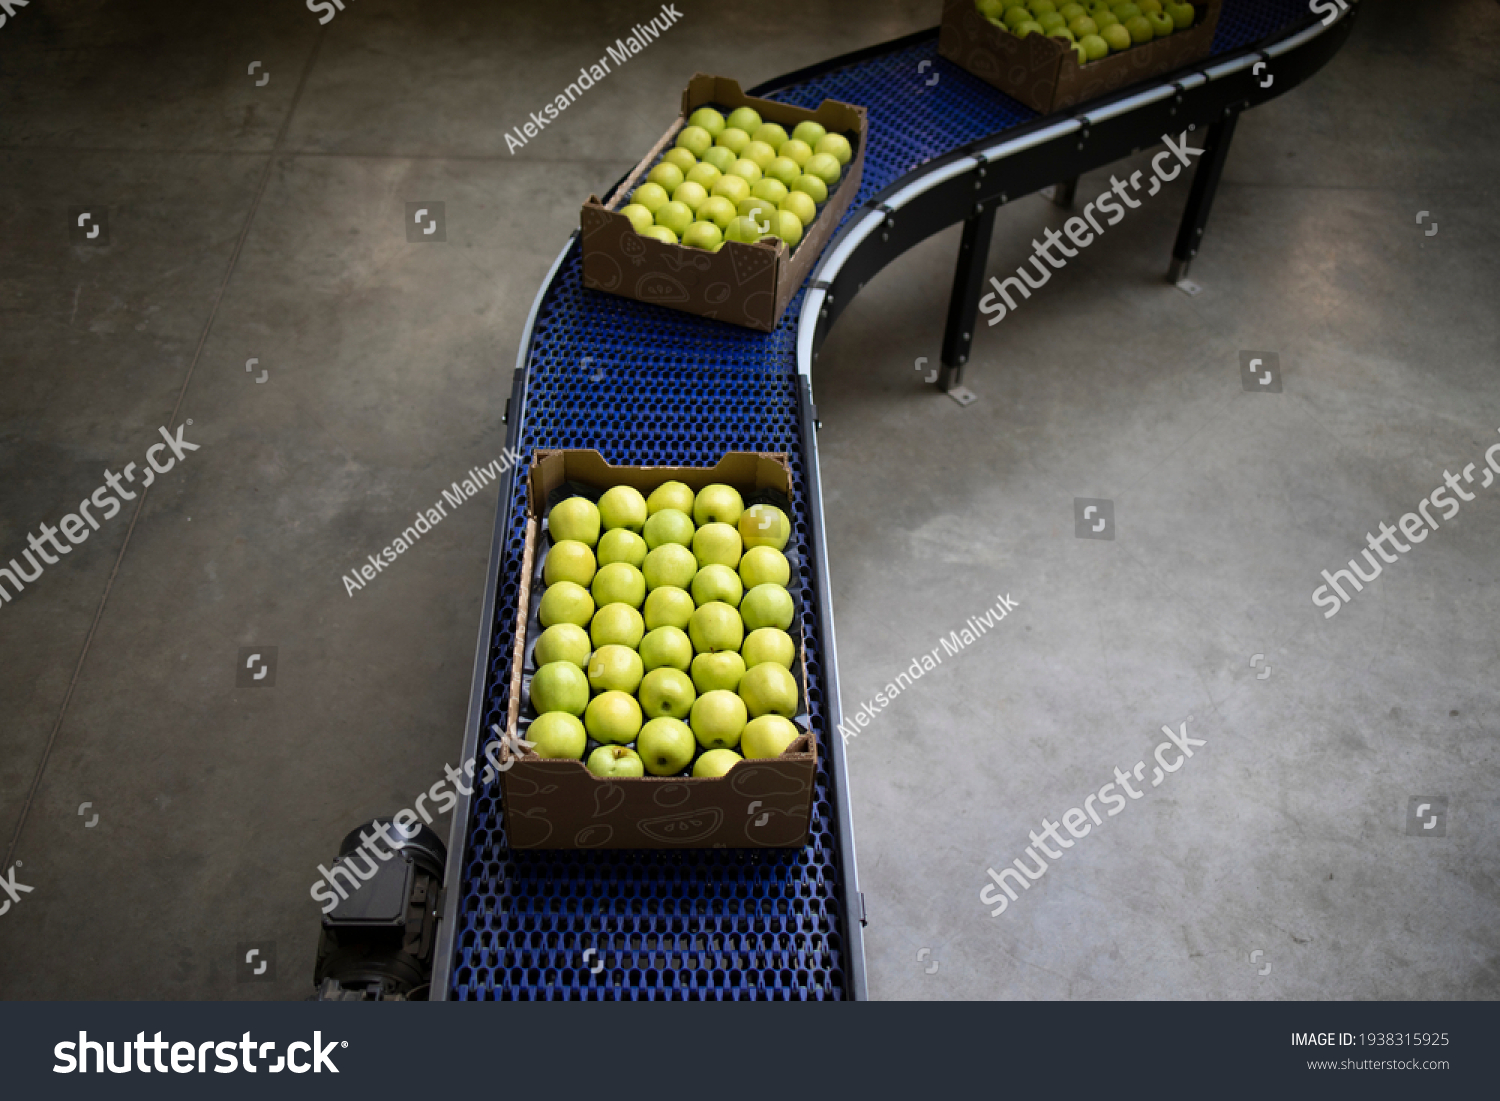 Top view of crates full with green organic apples being transported on conveyer belt in food processing factory. #1938315925